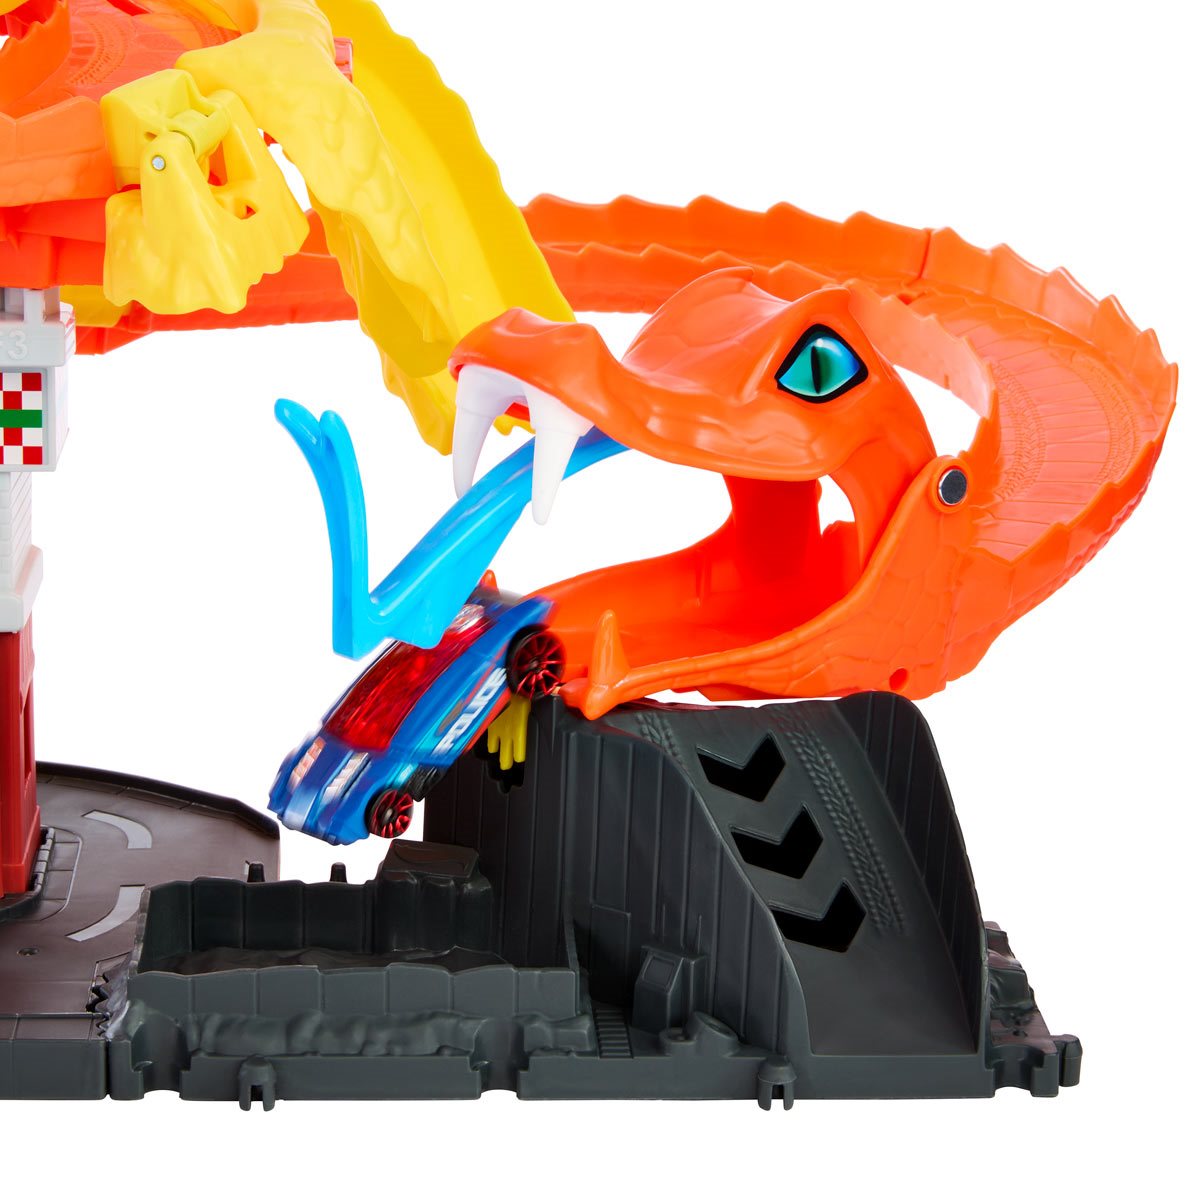 Hot Wheels Cobra Adventure Playset Snake-Themed Fun Set, Fighting Giant  Cobra From Cars Jail, Can Be Linked With Other Sets - AliExpress